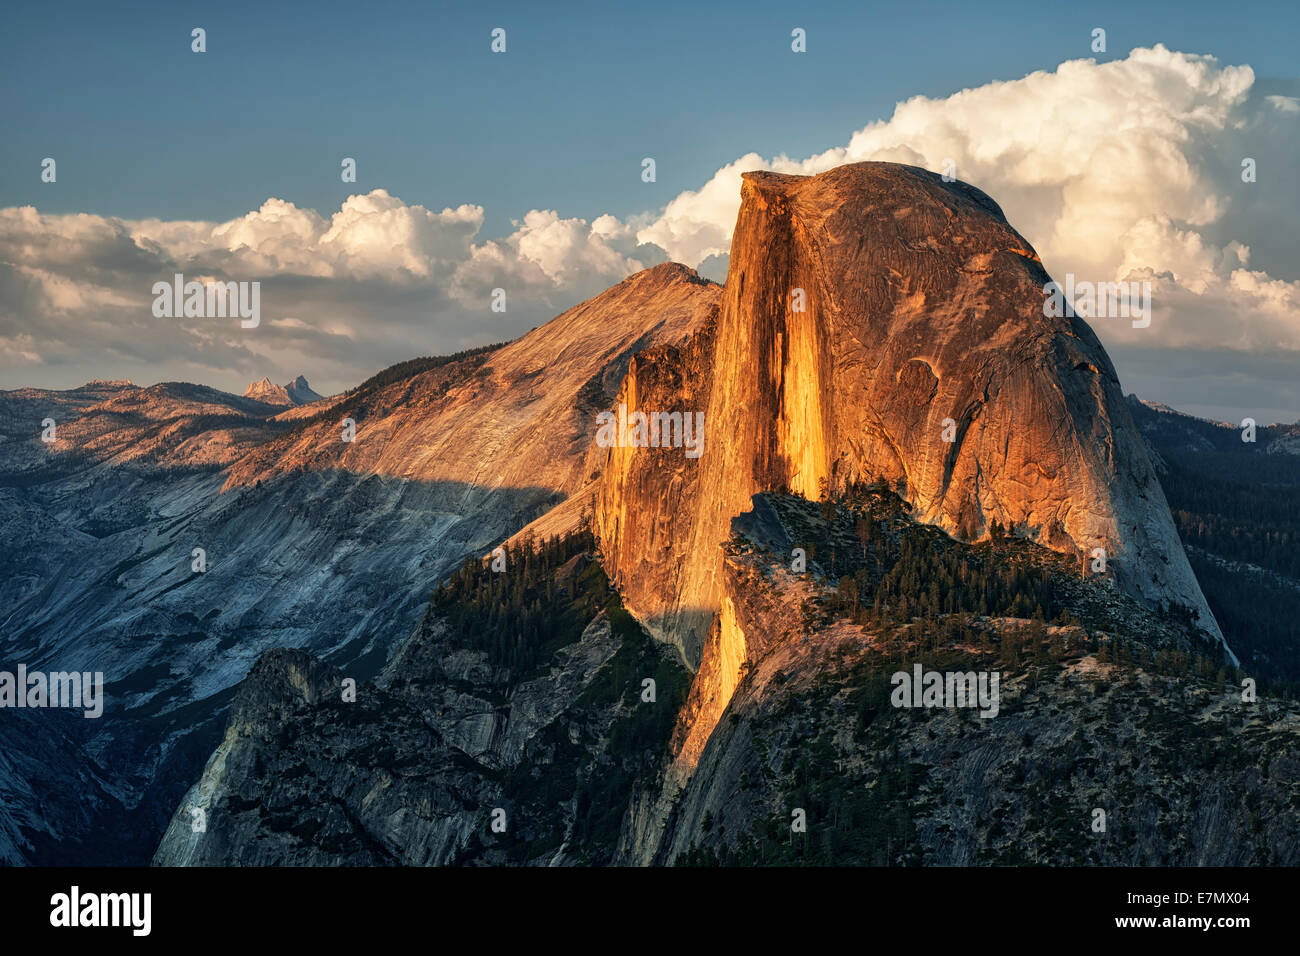 Evening's last light on the granite walls of Half Dome as thunderheads build over California's Yosemite National Park. Stock Photo